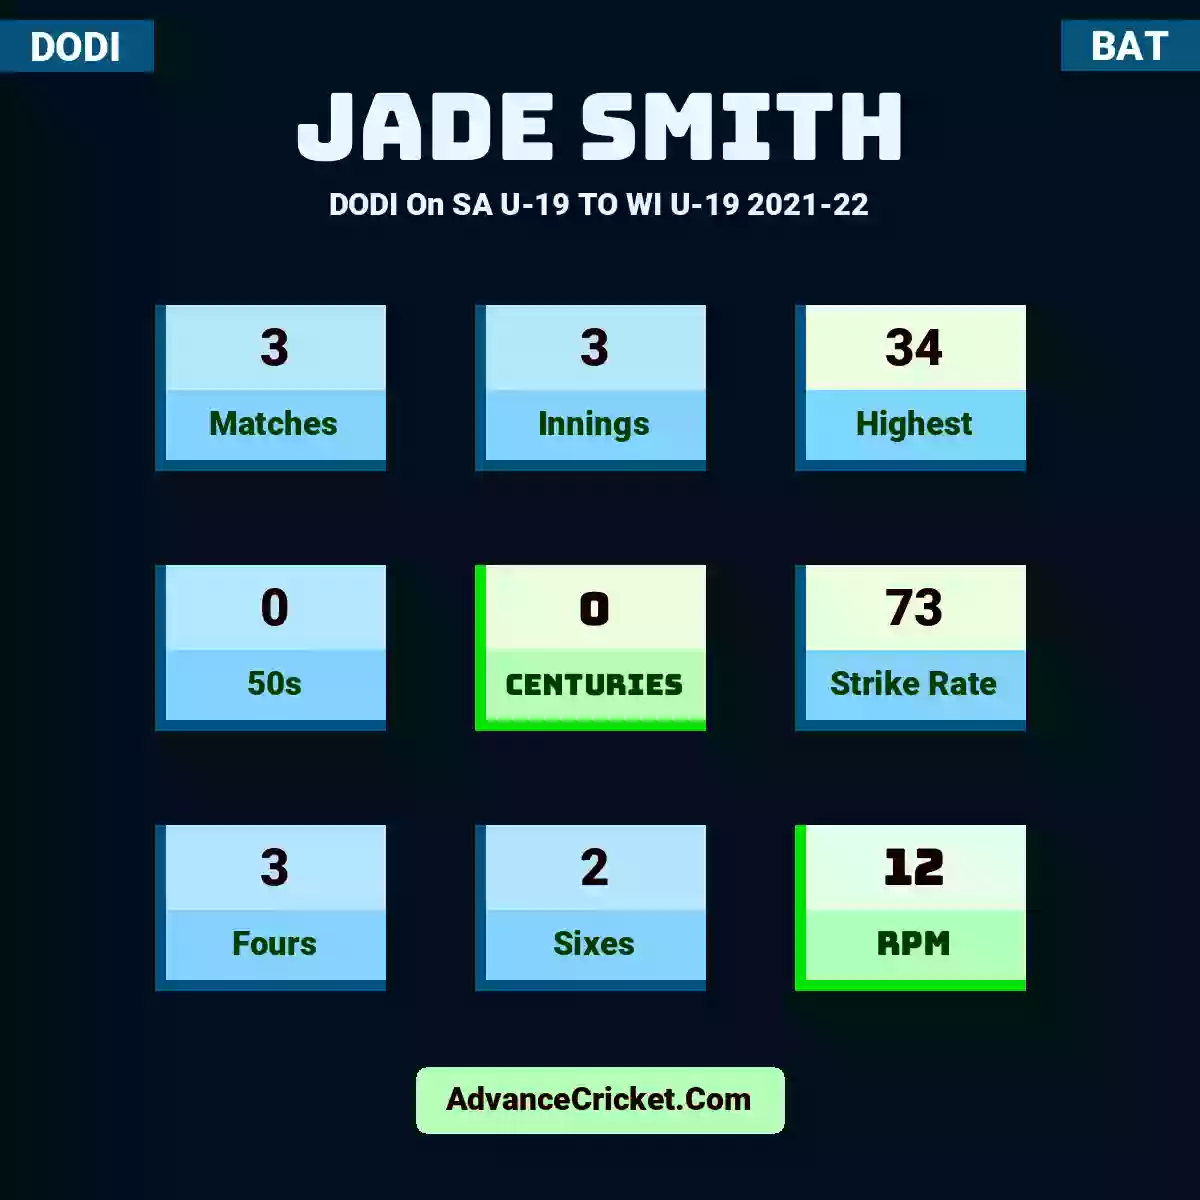 Jade Smith DODI  On SA U-19 TO WI U-19 2021-22, Jade Smith played 3 matches, scored 34 runs as highest, 0 half-centuries, and 0 centuries, with a strike rate of 73. J.Smith hit 3 fours and 2 sixes, with an RPM of 12.